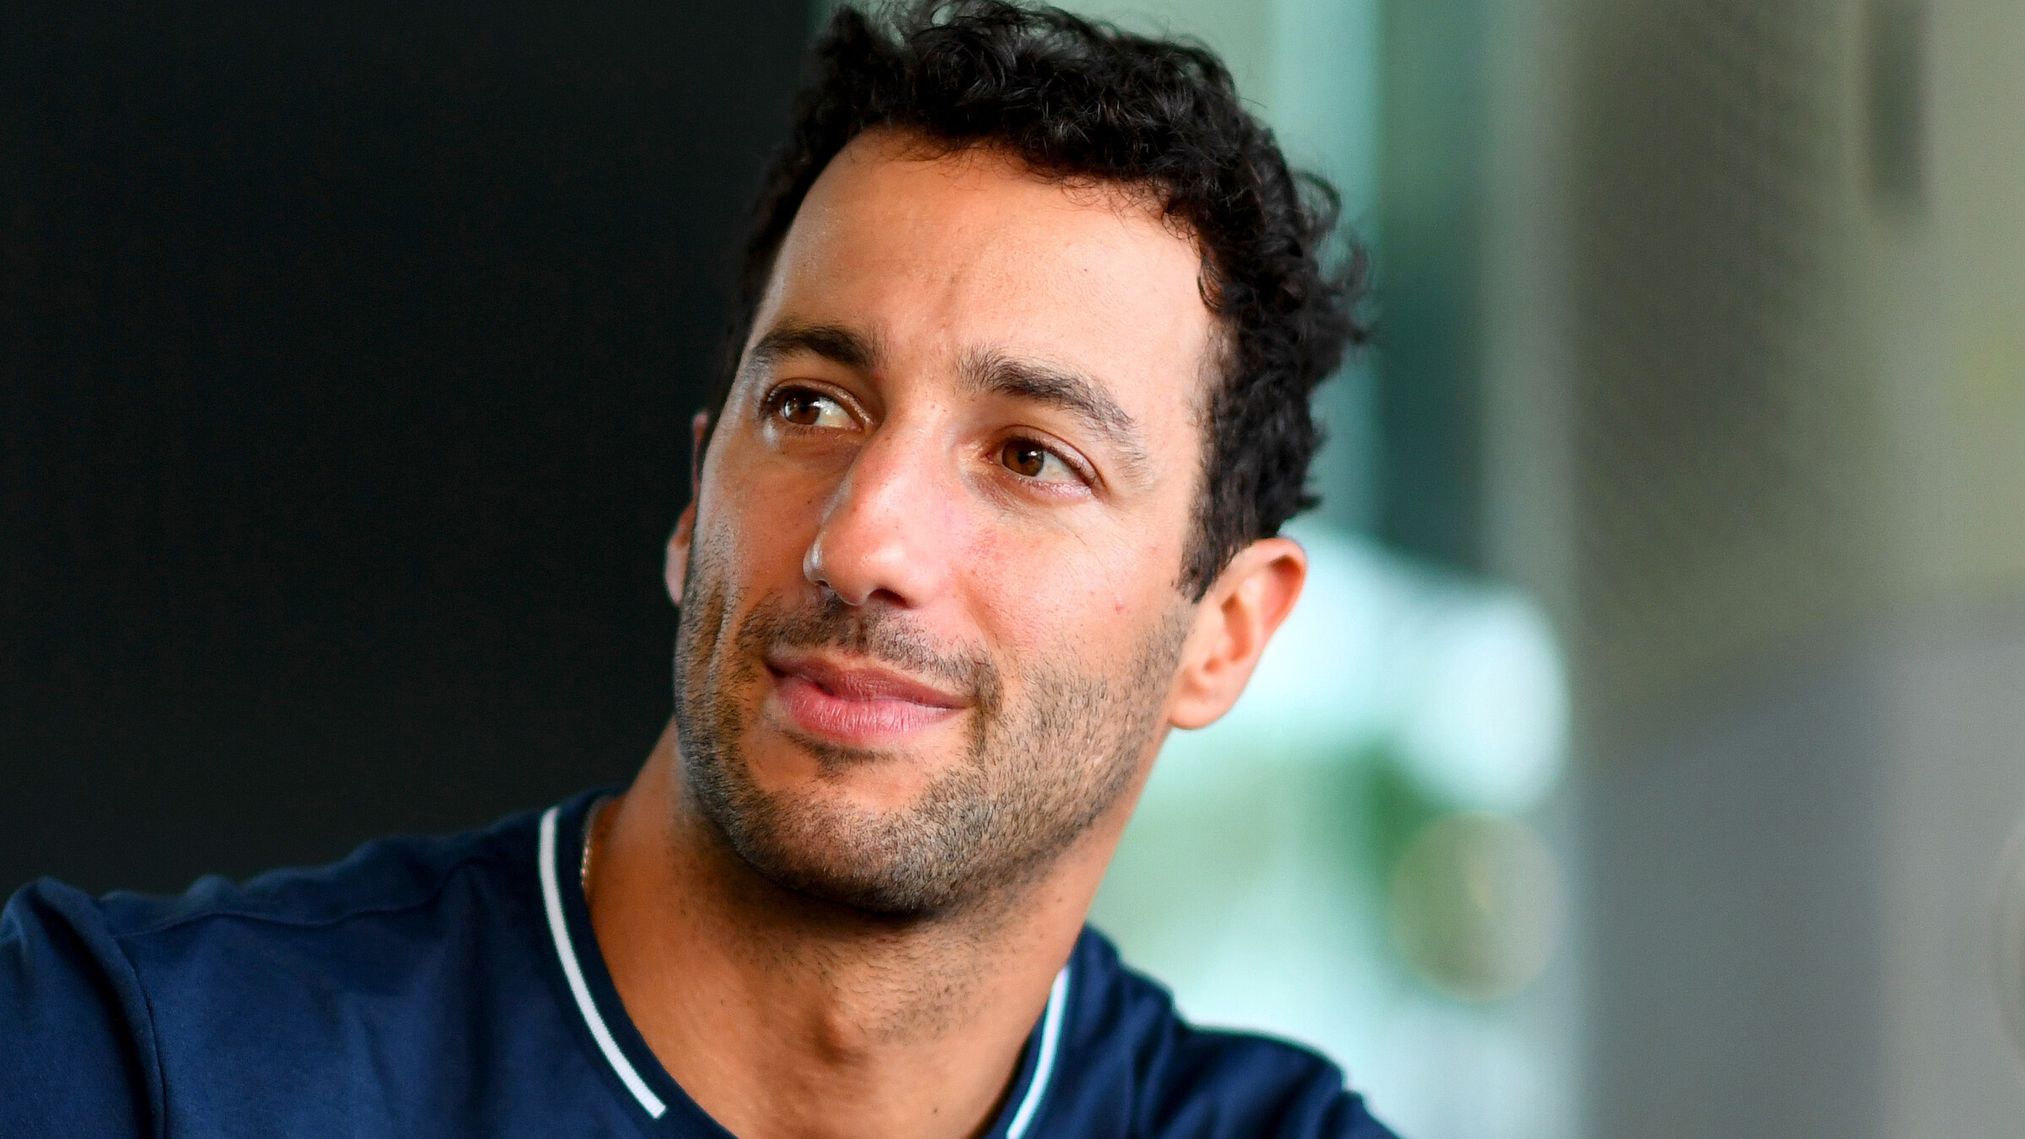 Daniel Ricciardo has been sidelined since breaking his hand at the Dutch Grand Prix.